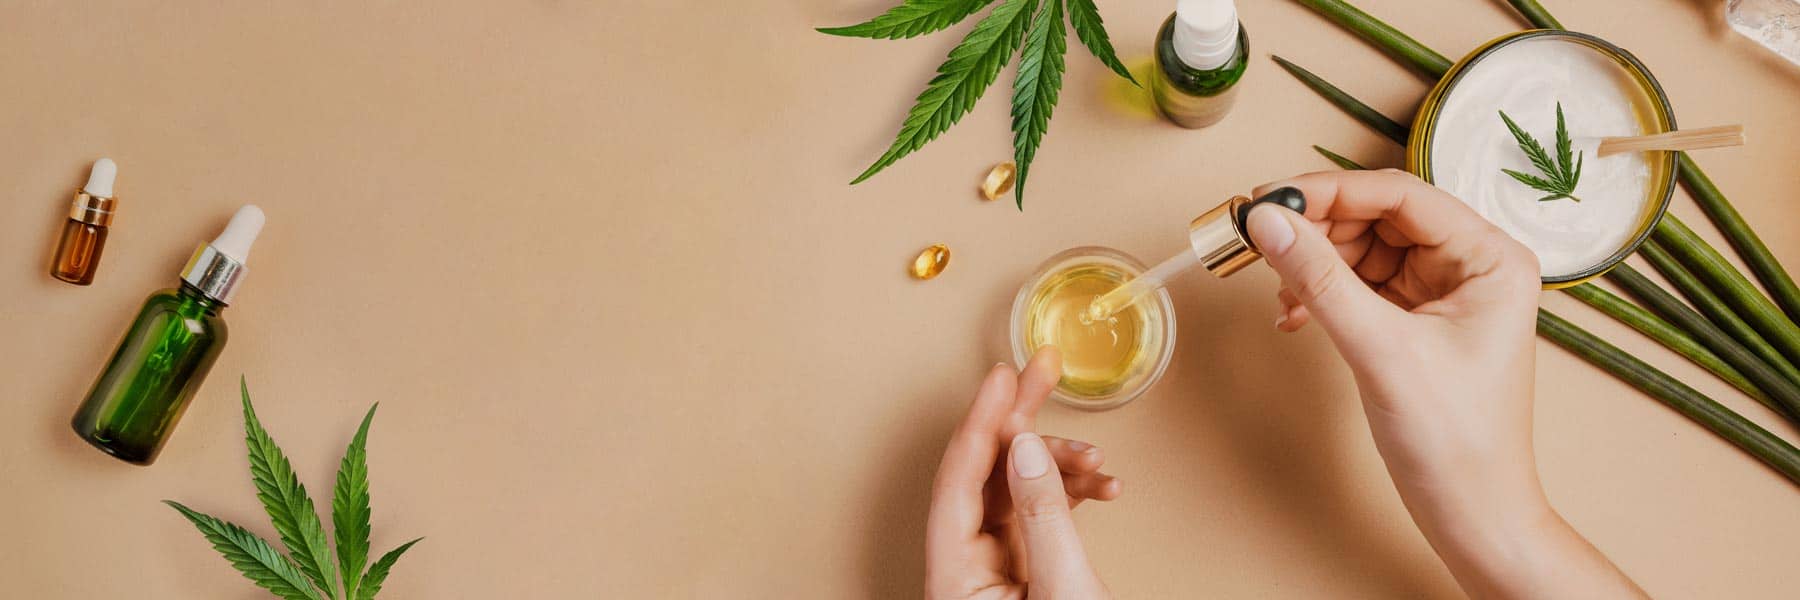 CBD Topicals vs. Oral CBD: The Key Differences Explained